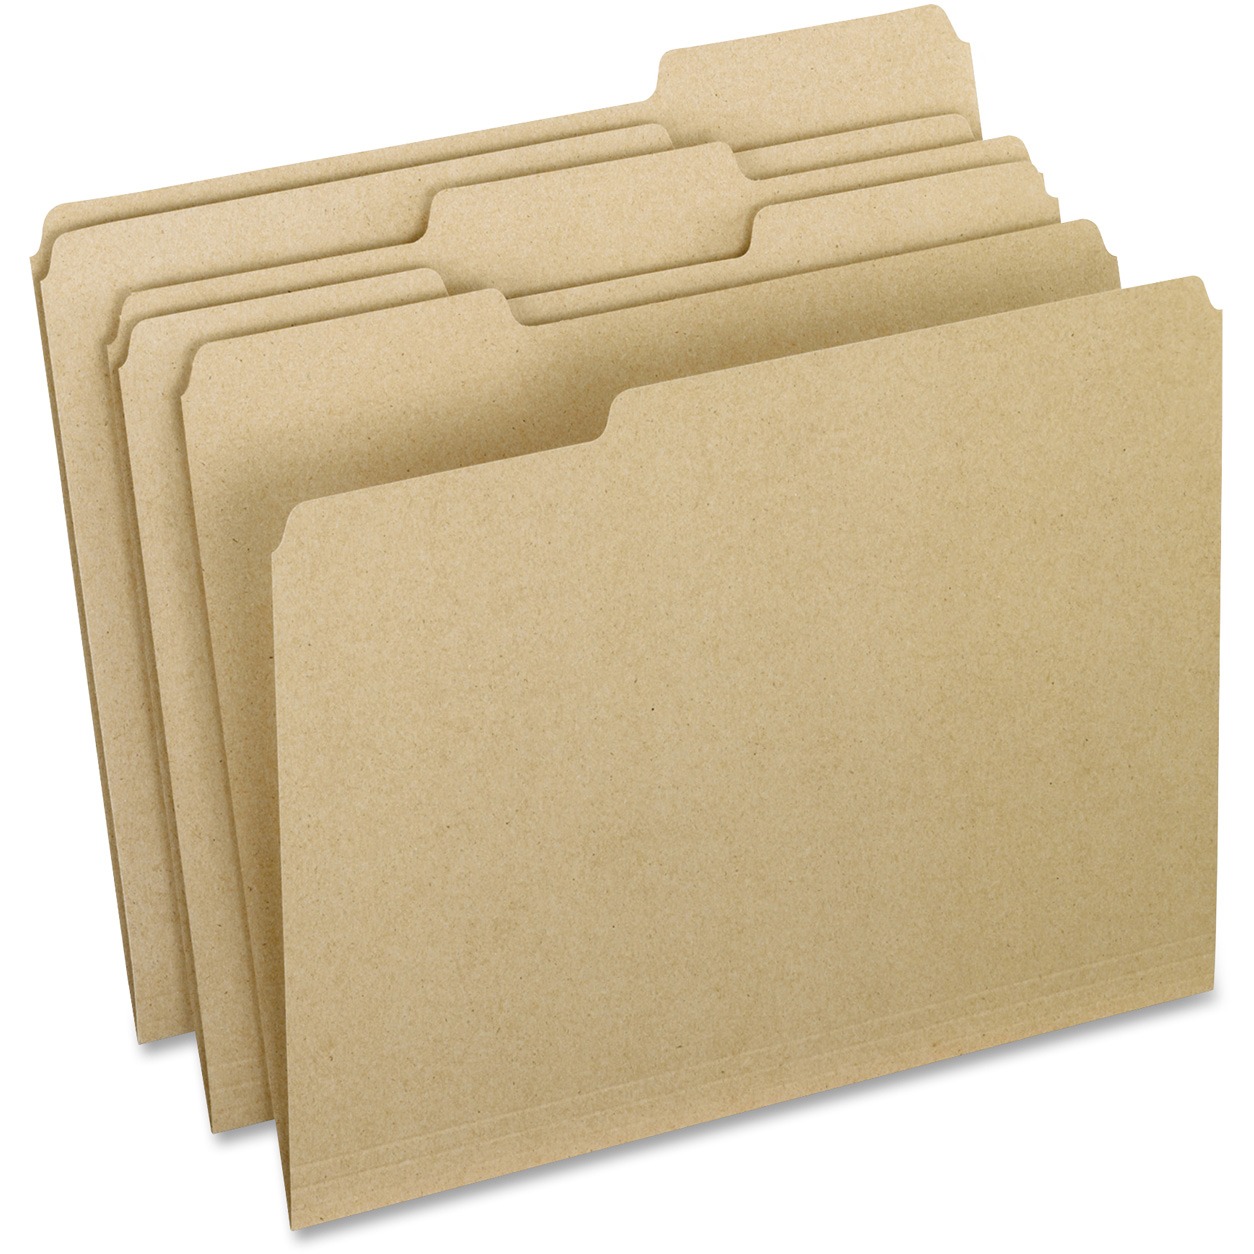 Earthwise Recycled Colored File Folders, 1/3 Top Tab, Letter, Natural, 100/Box